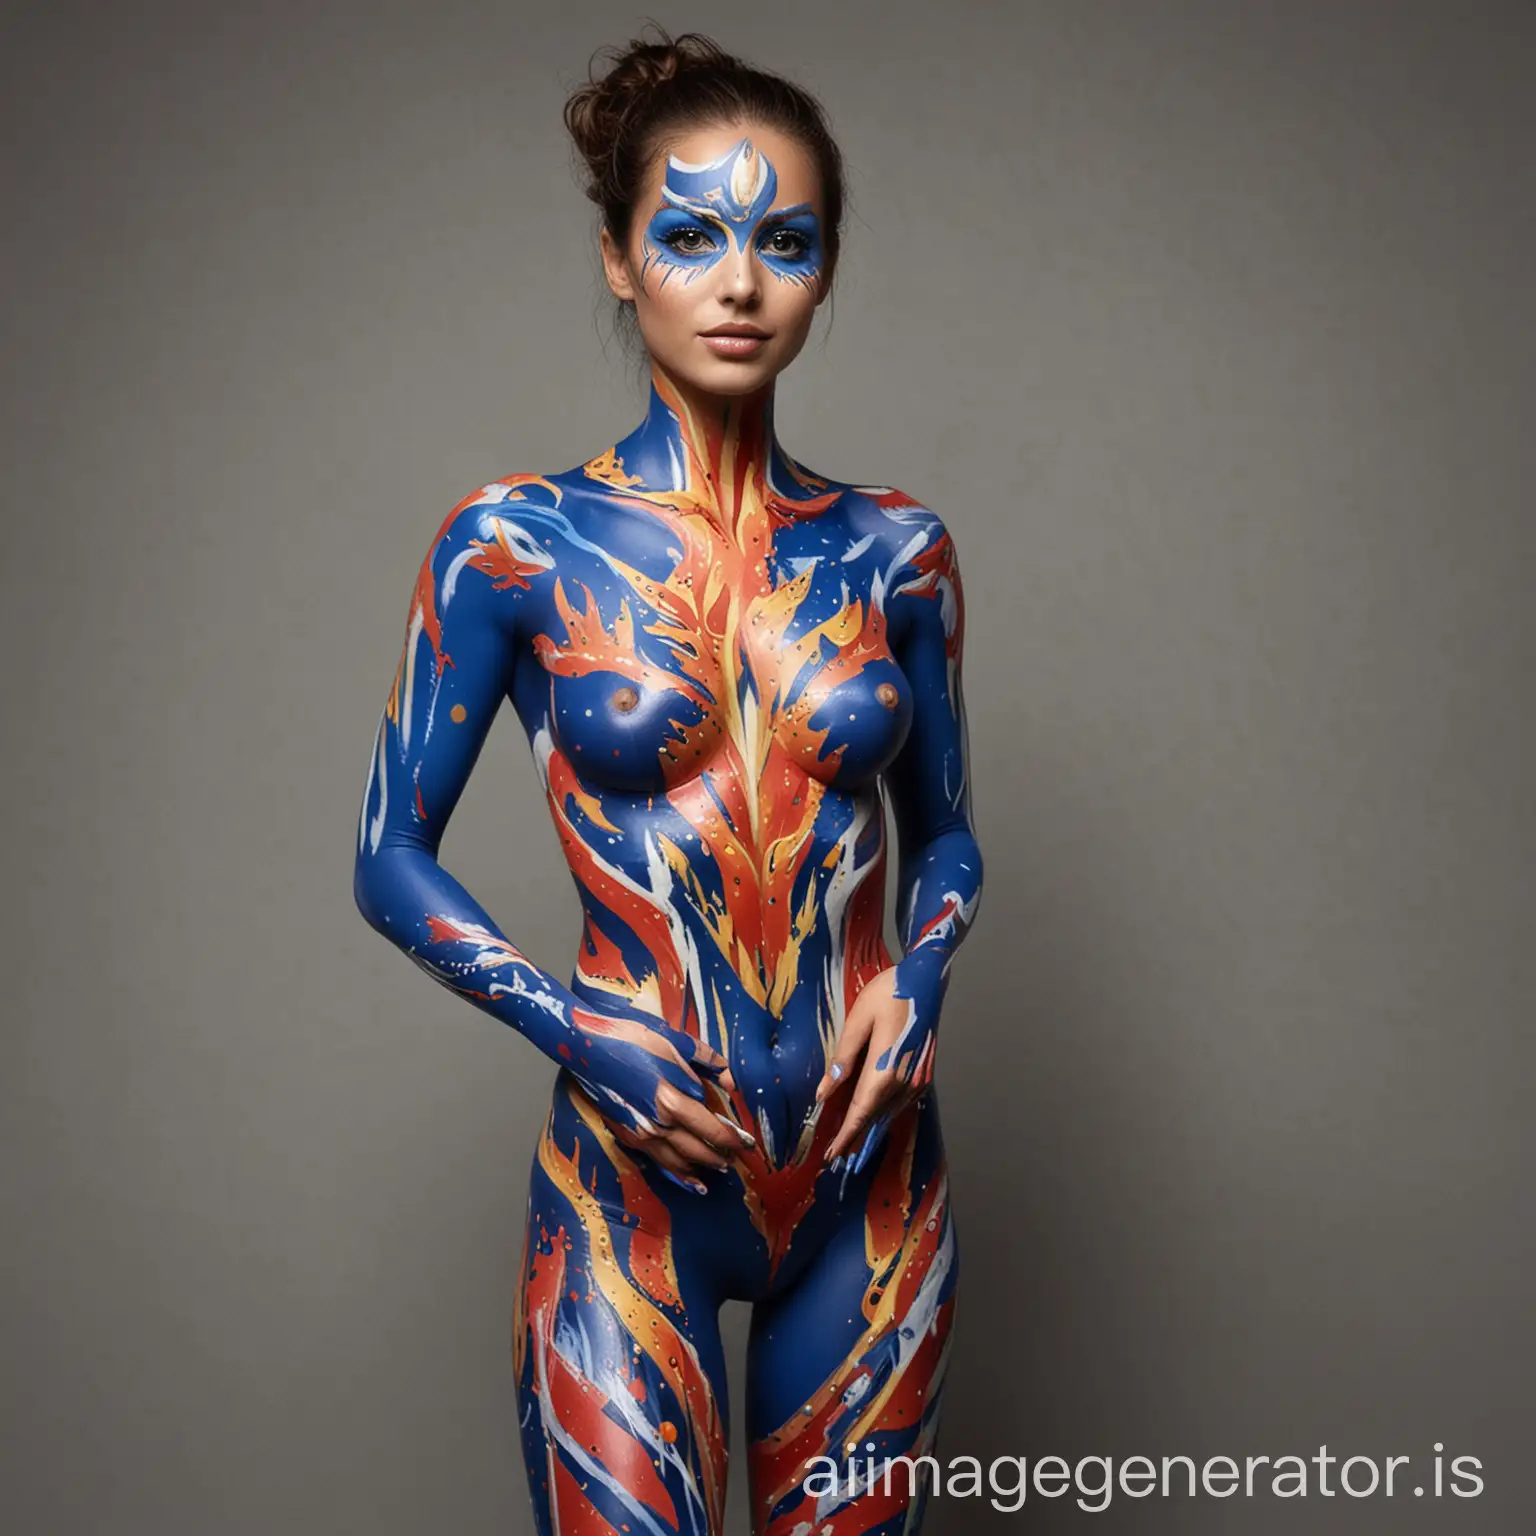 Colorful-Body-Paint-Art-Performance